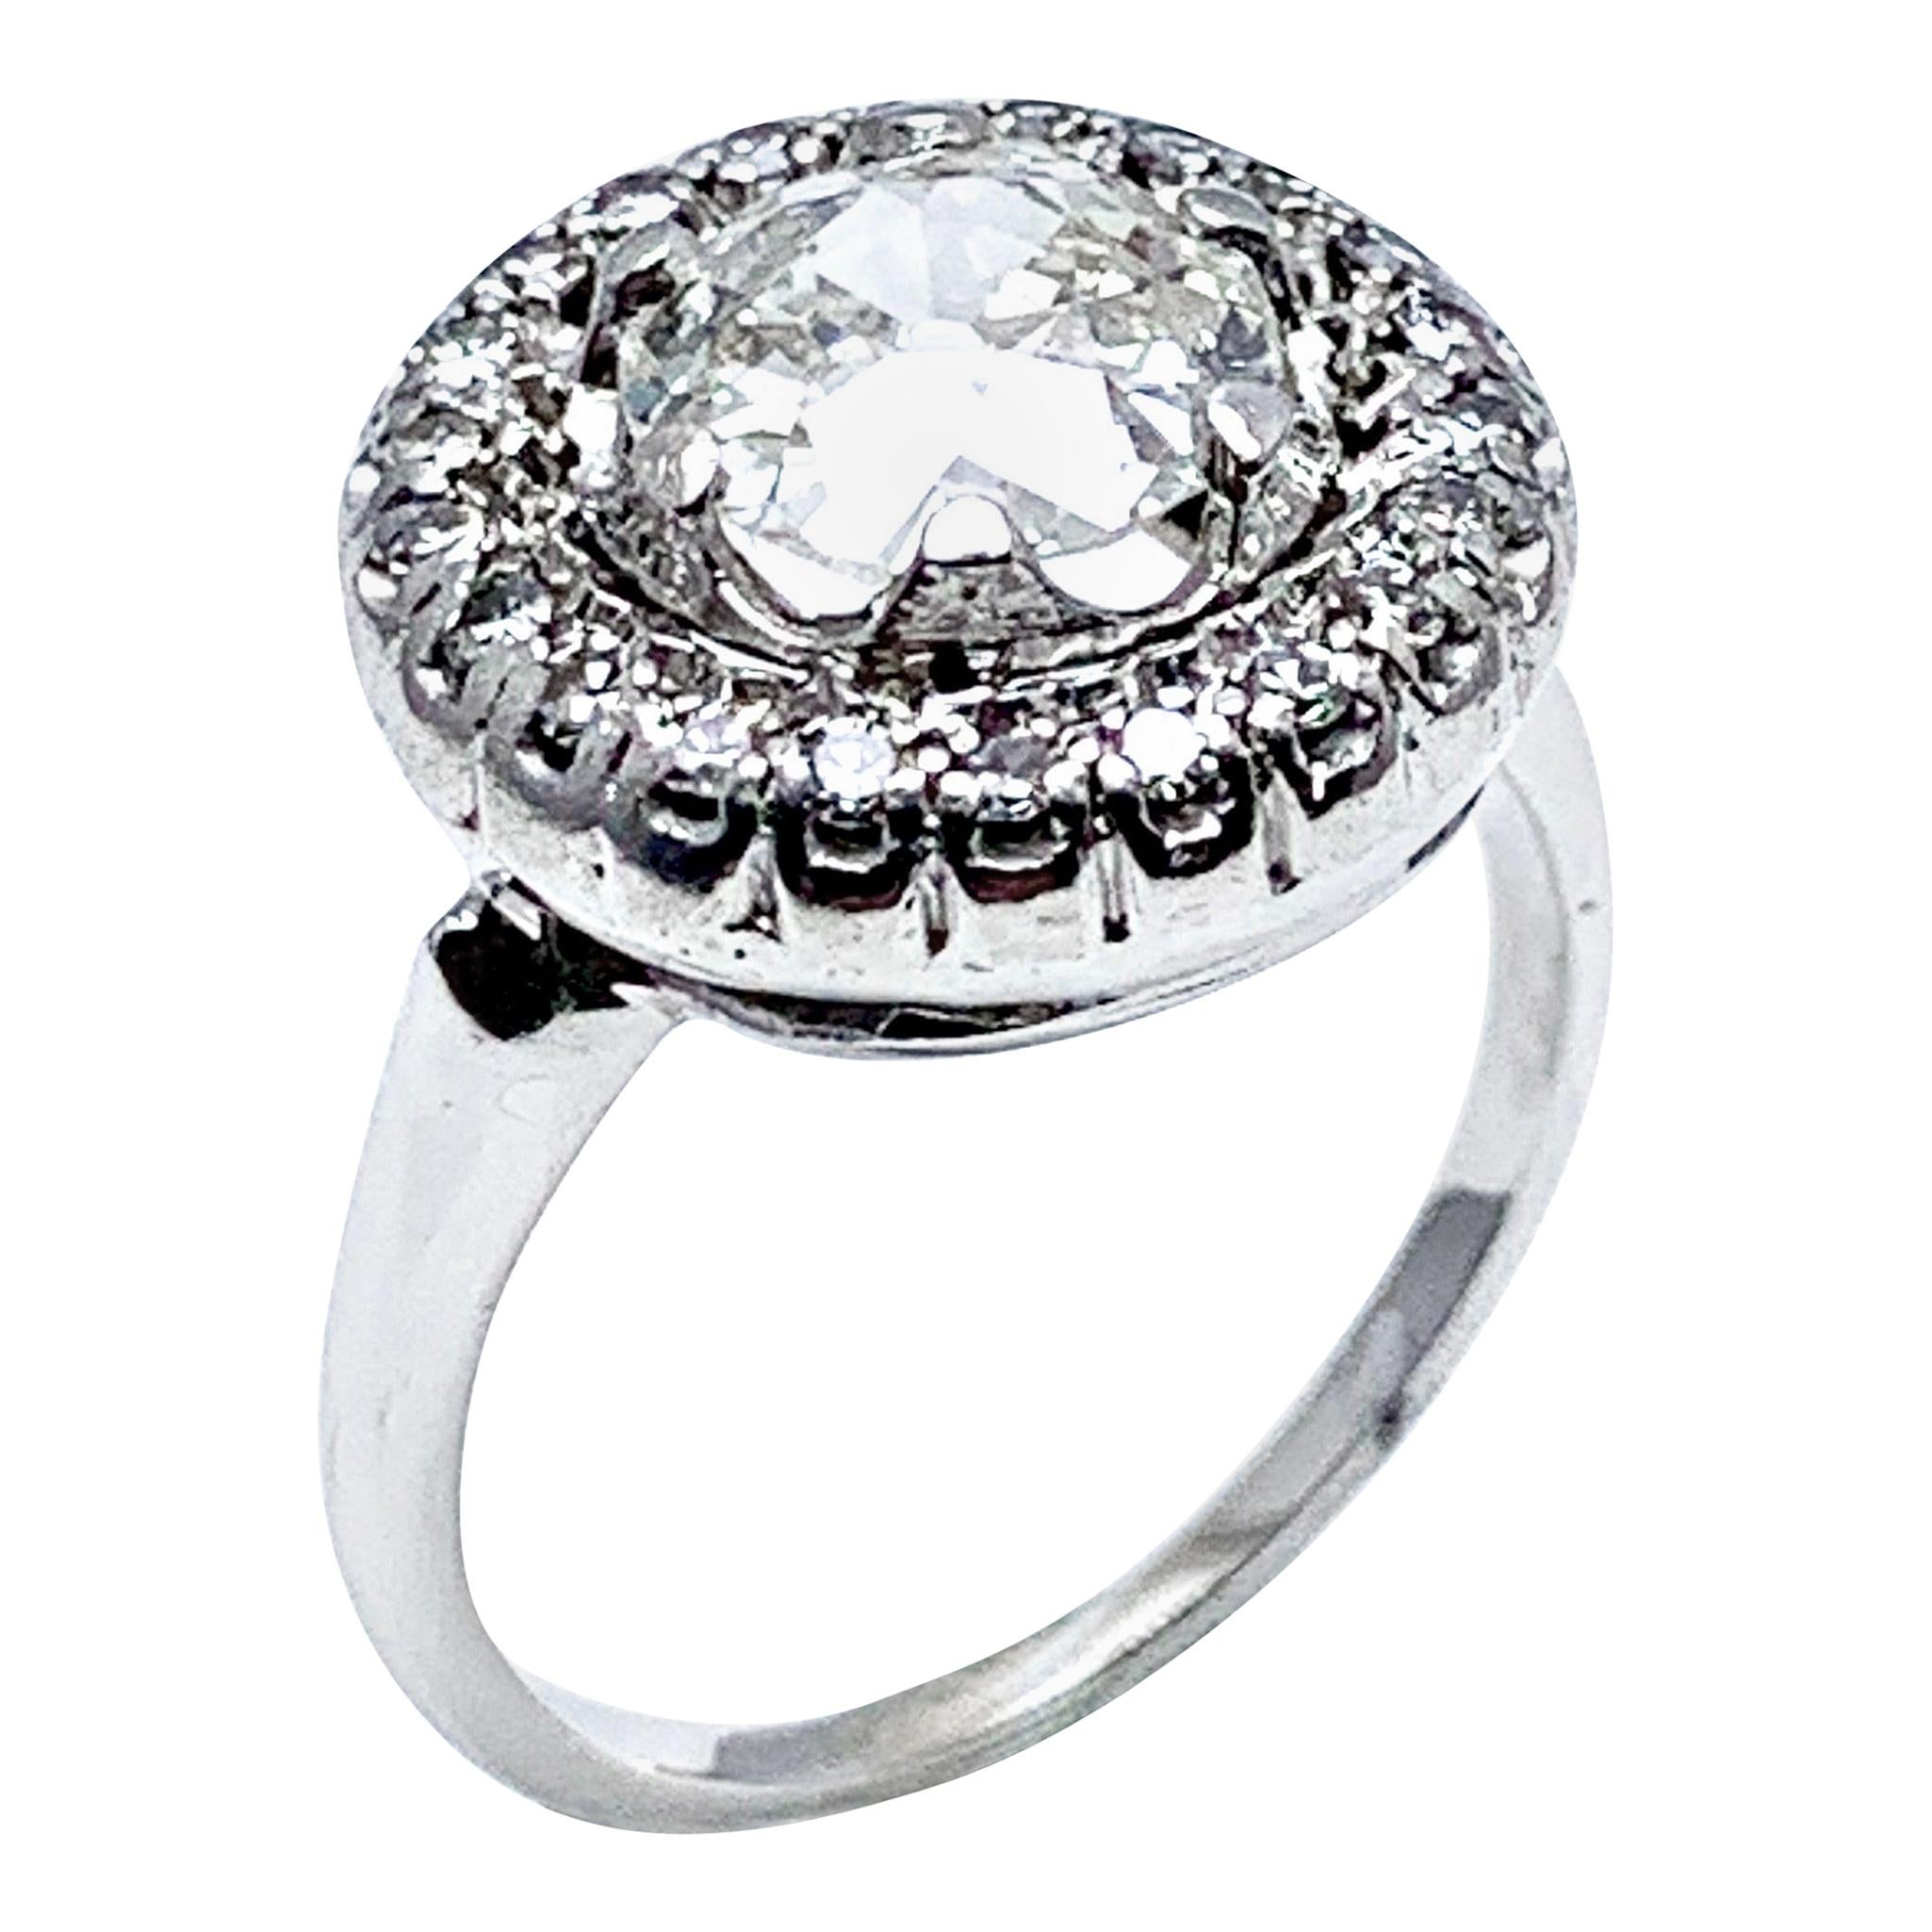 1.48 Carat Old European Cut and Single Cut Diamond White Gold Ring For Sale